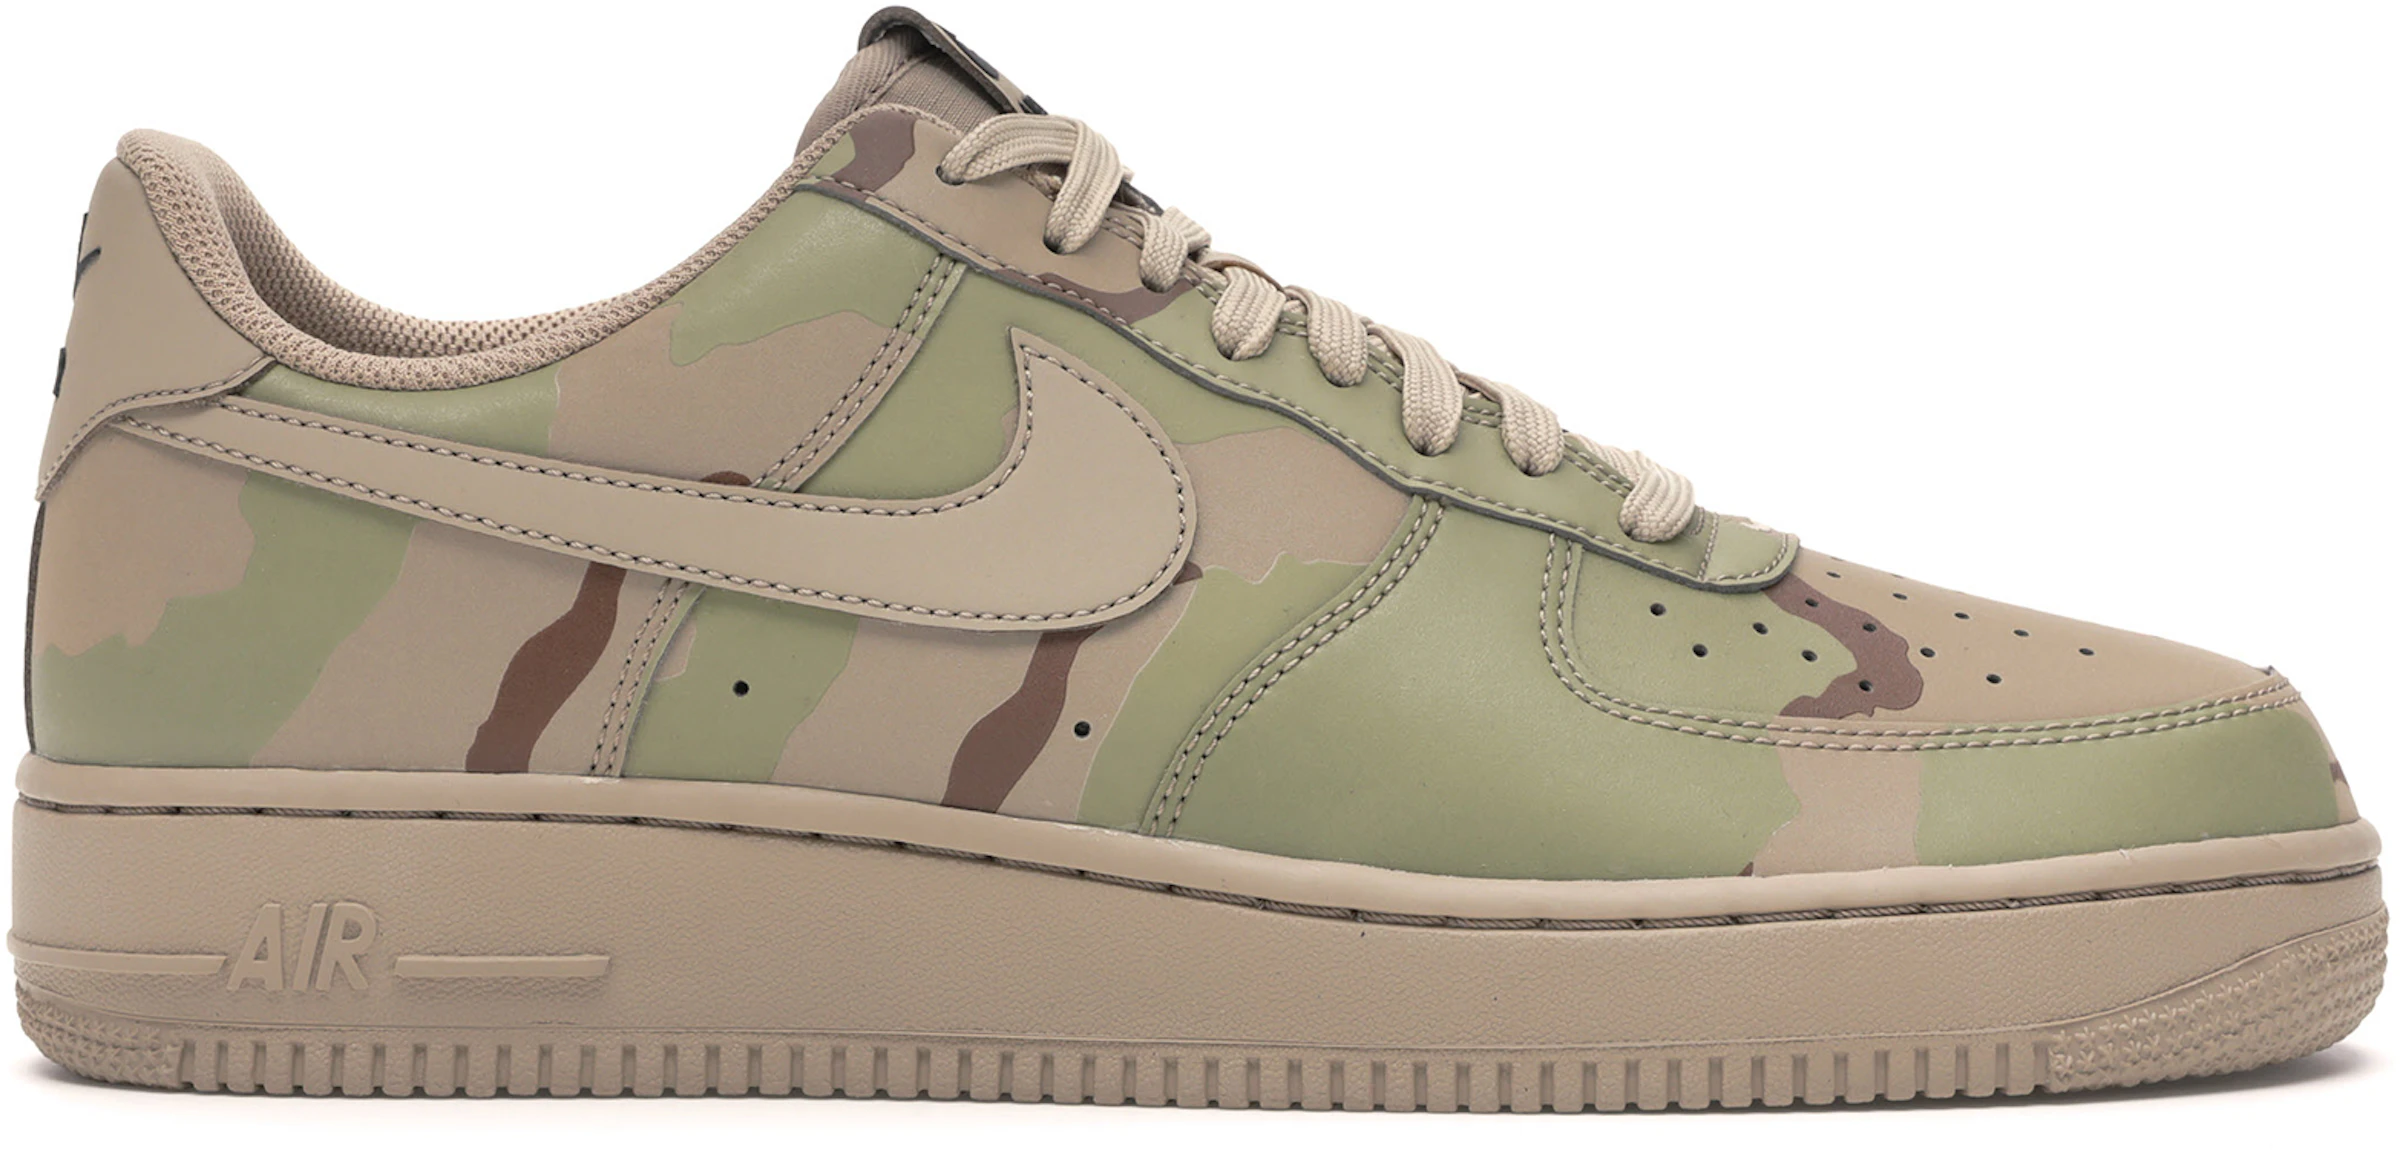 Nike Air Force 1 Low Reflective Desert Camo - 718152-204 ES